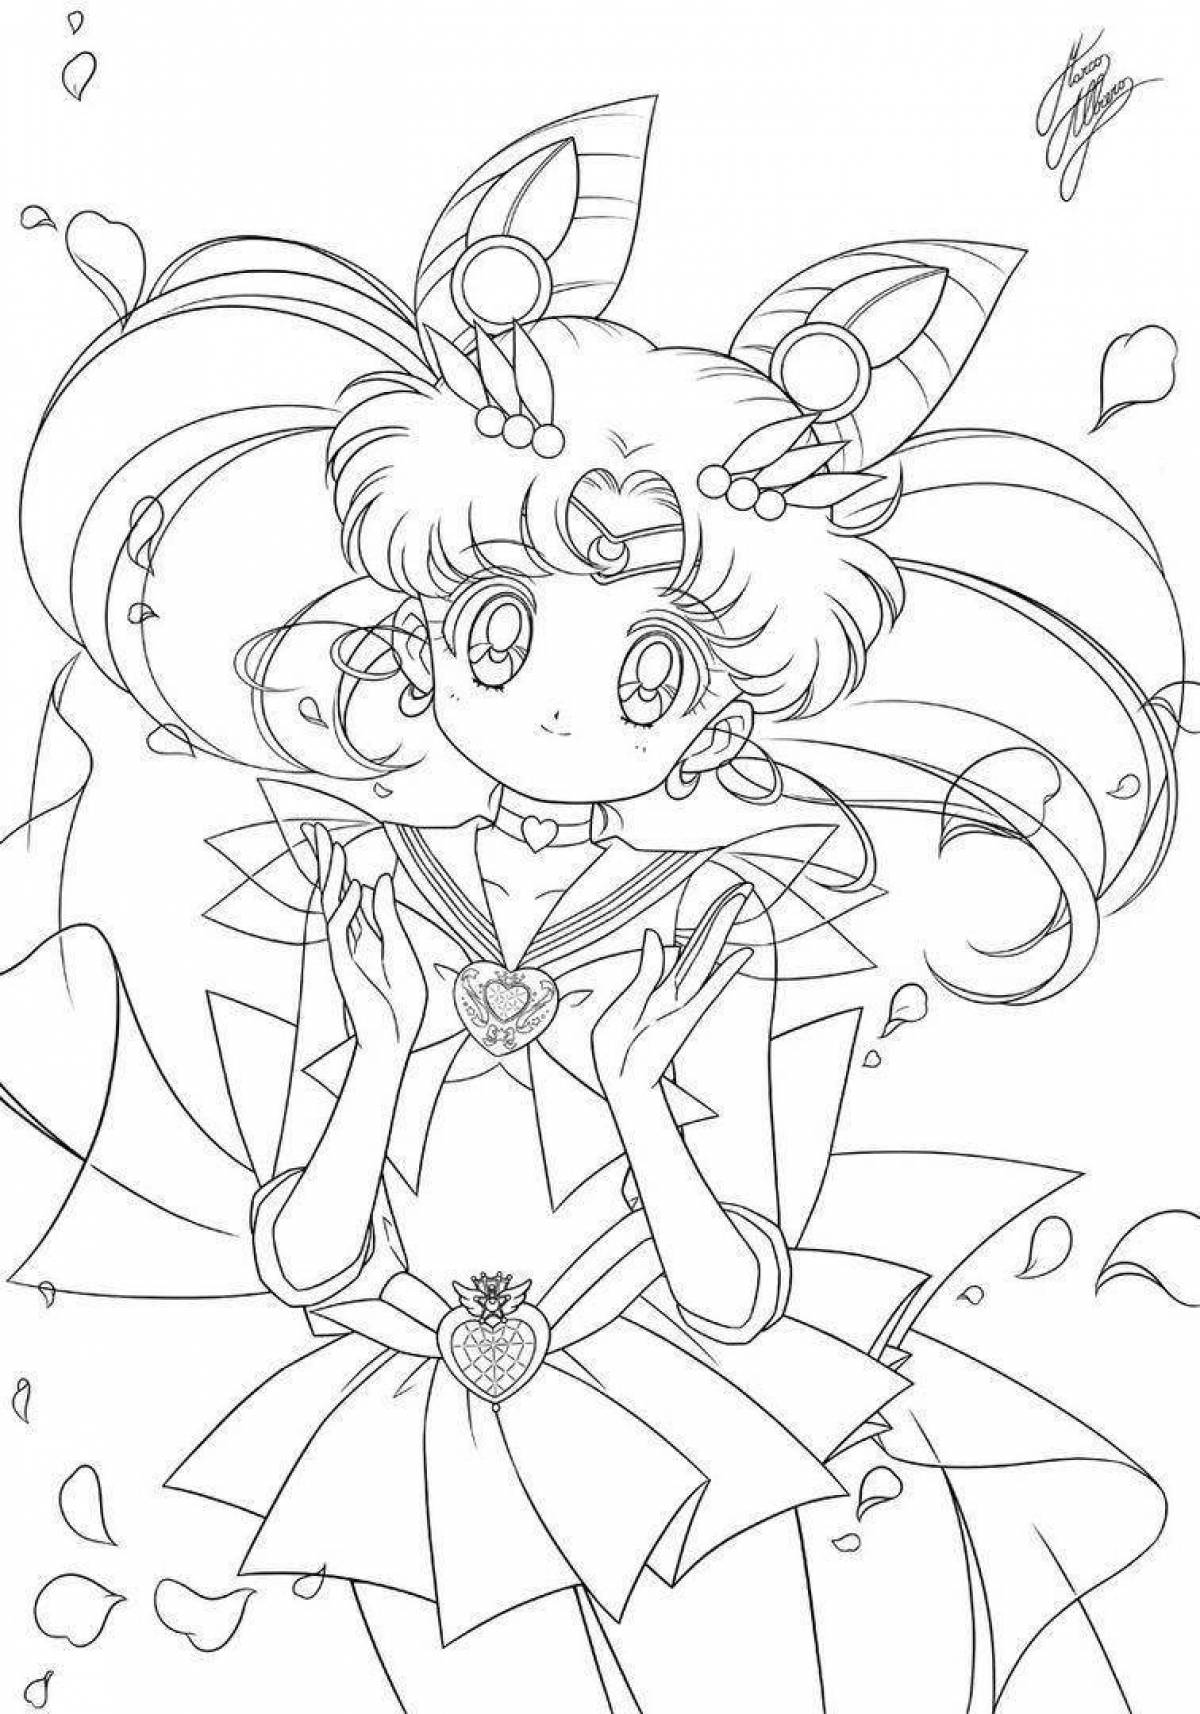 Colorful sailor moon coloring page